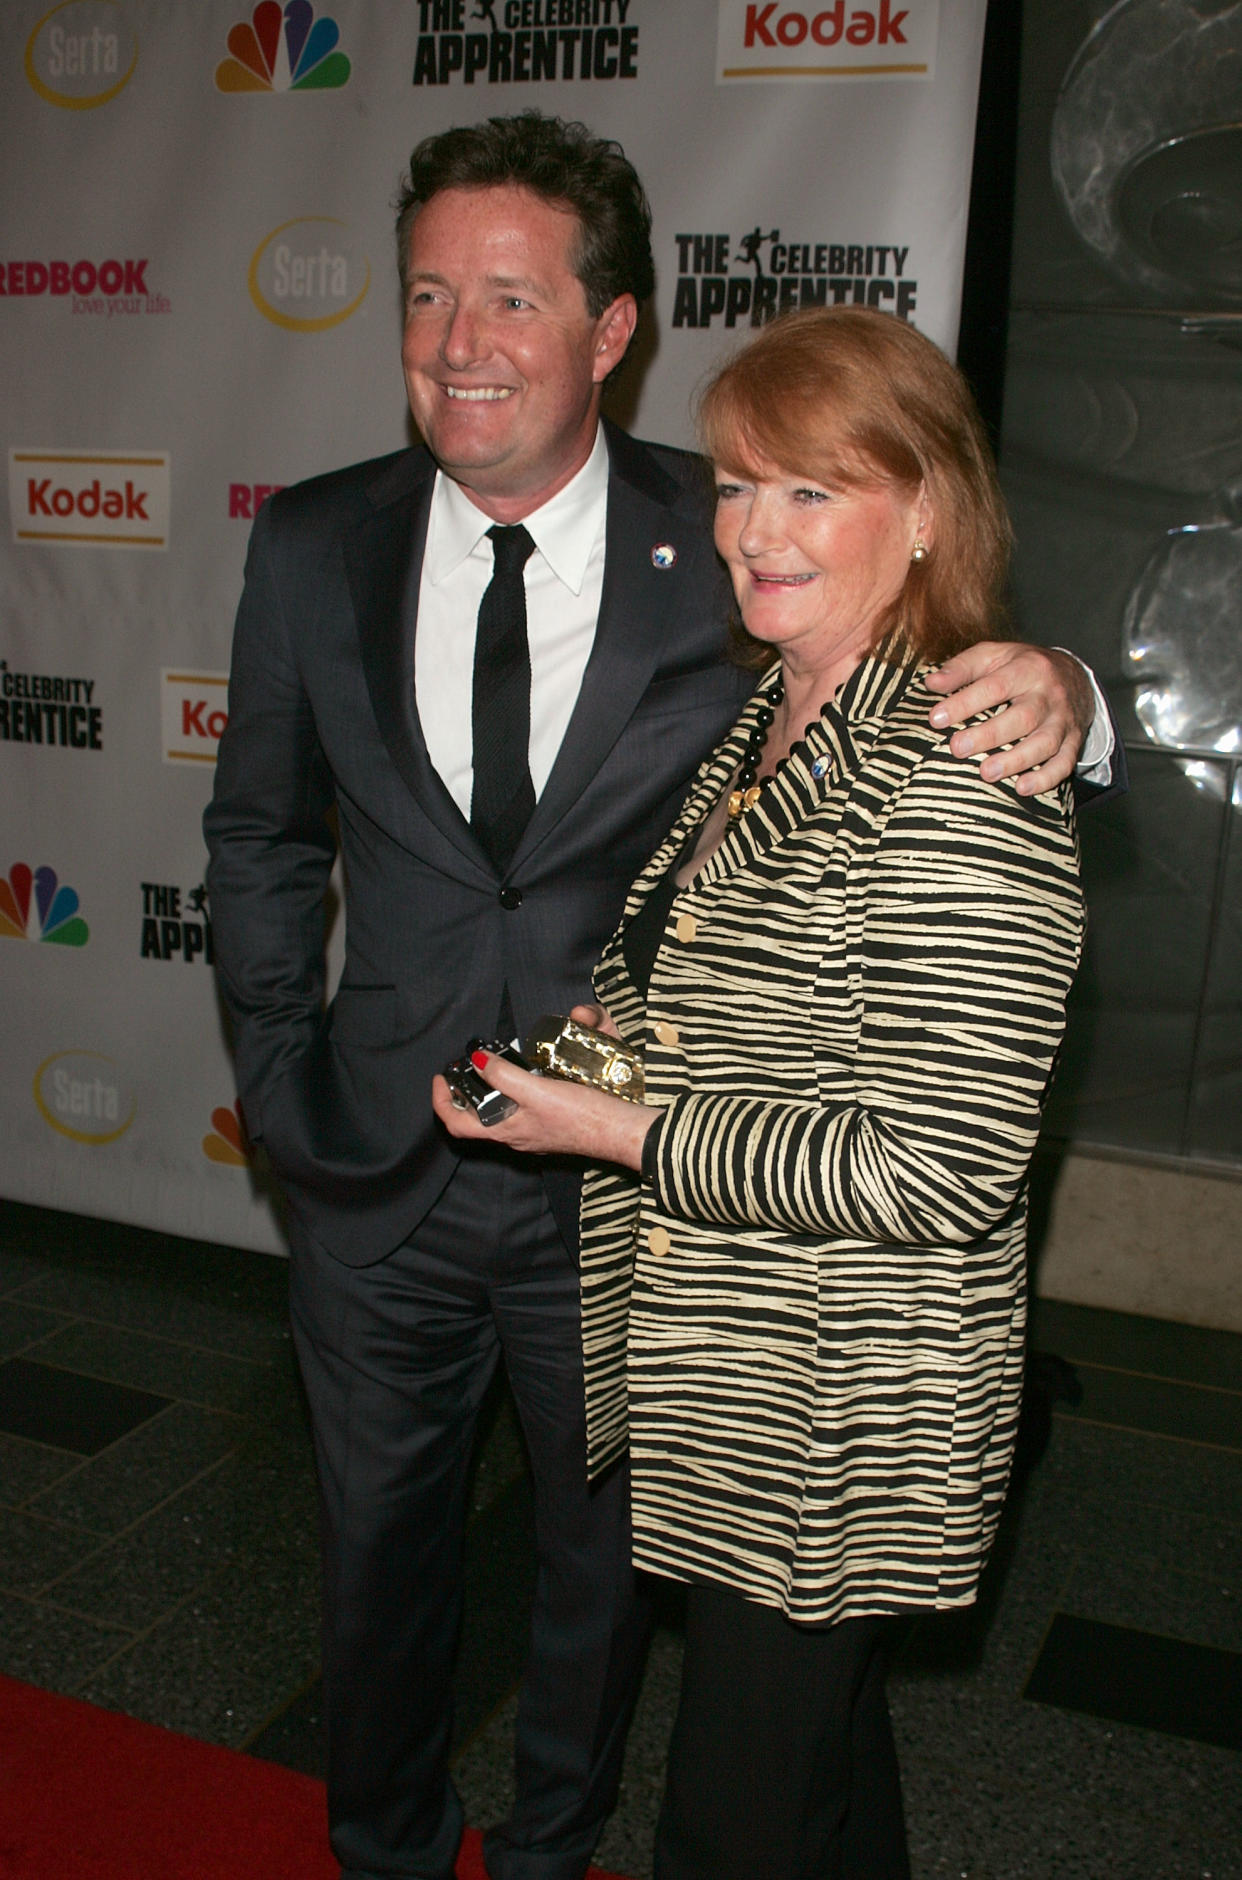 Piers Morgan and his mother attend "The Celebrity Apprentice" Finale at Rock Center Cafe, Rockefeller Center on March 27, 2008 in New York City. (Photo by Jim Spellman/WireImage)